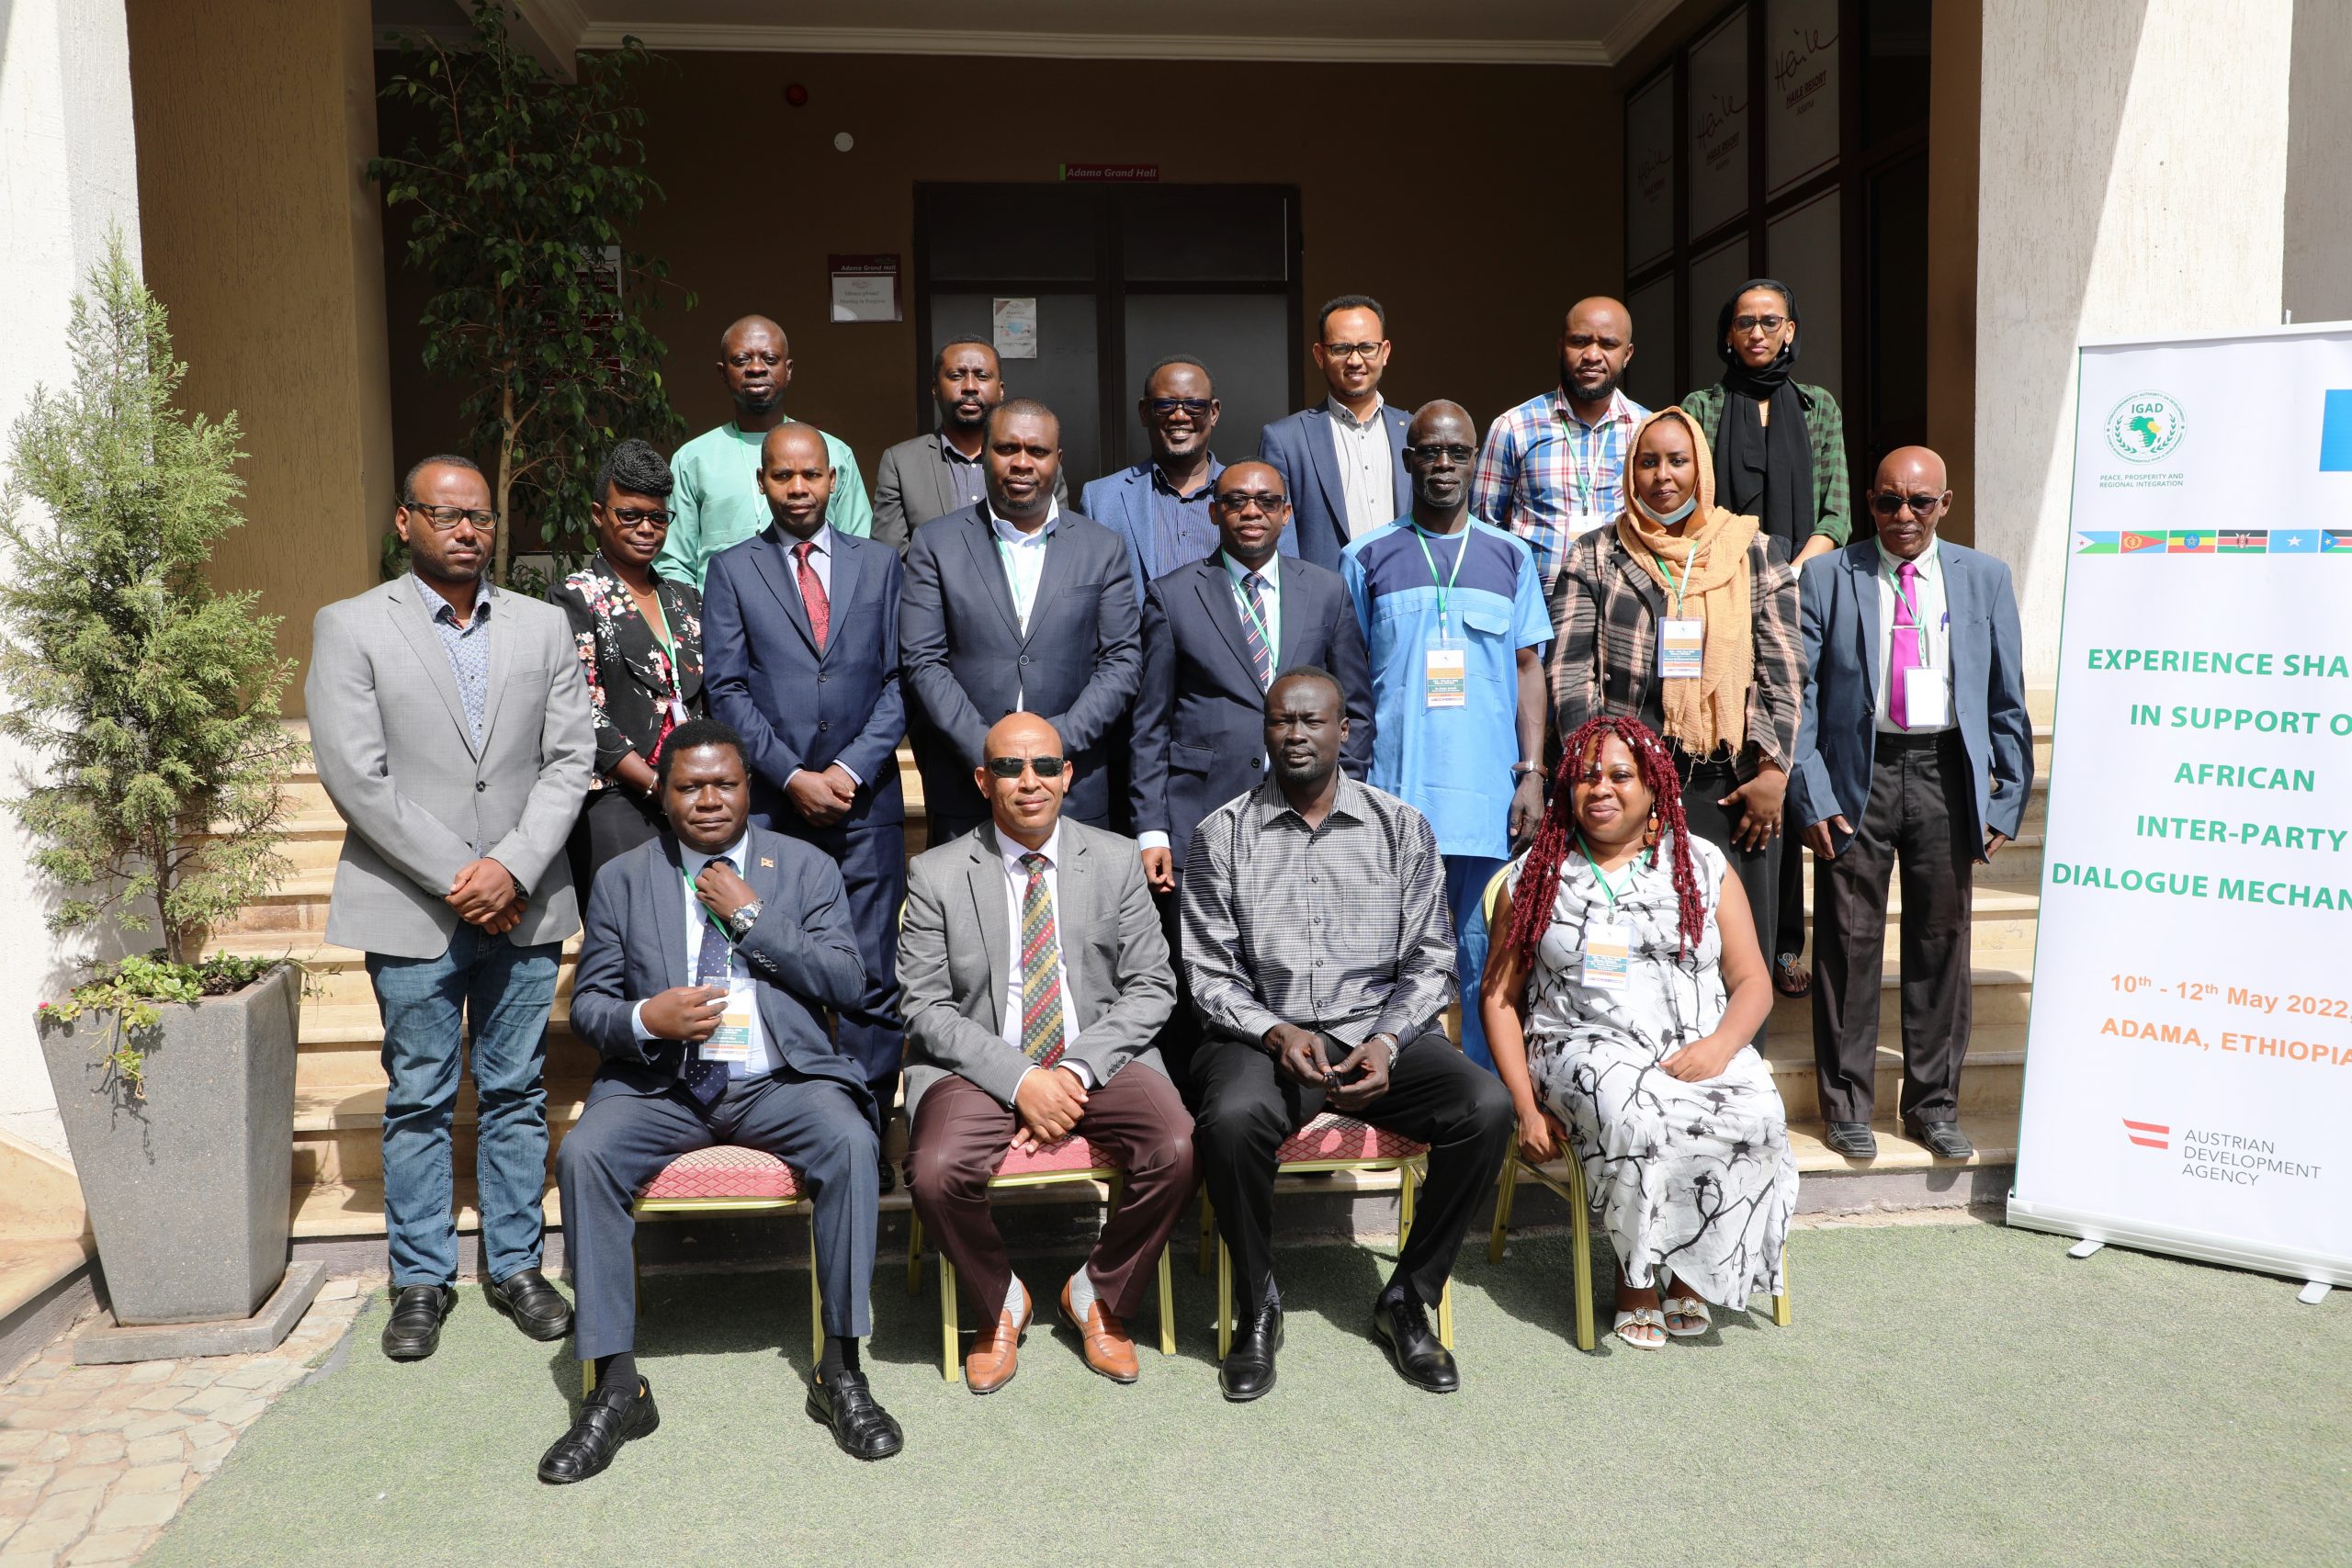 Experience Sharing in Support of African Inter-Party Dialogue Mechanisms